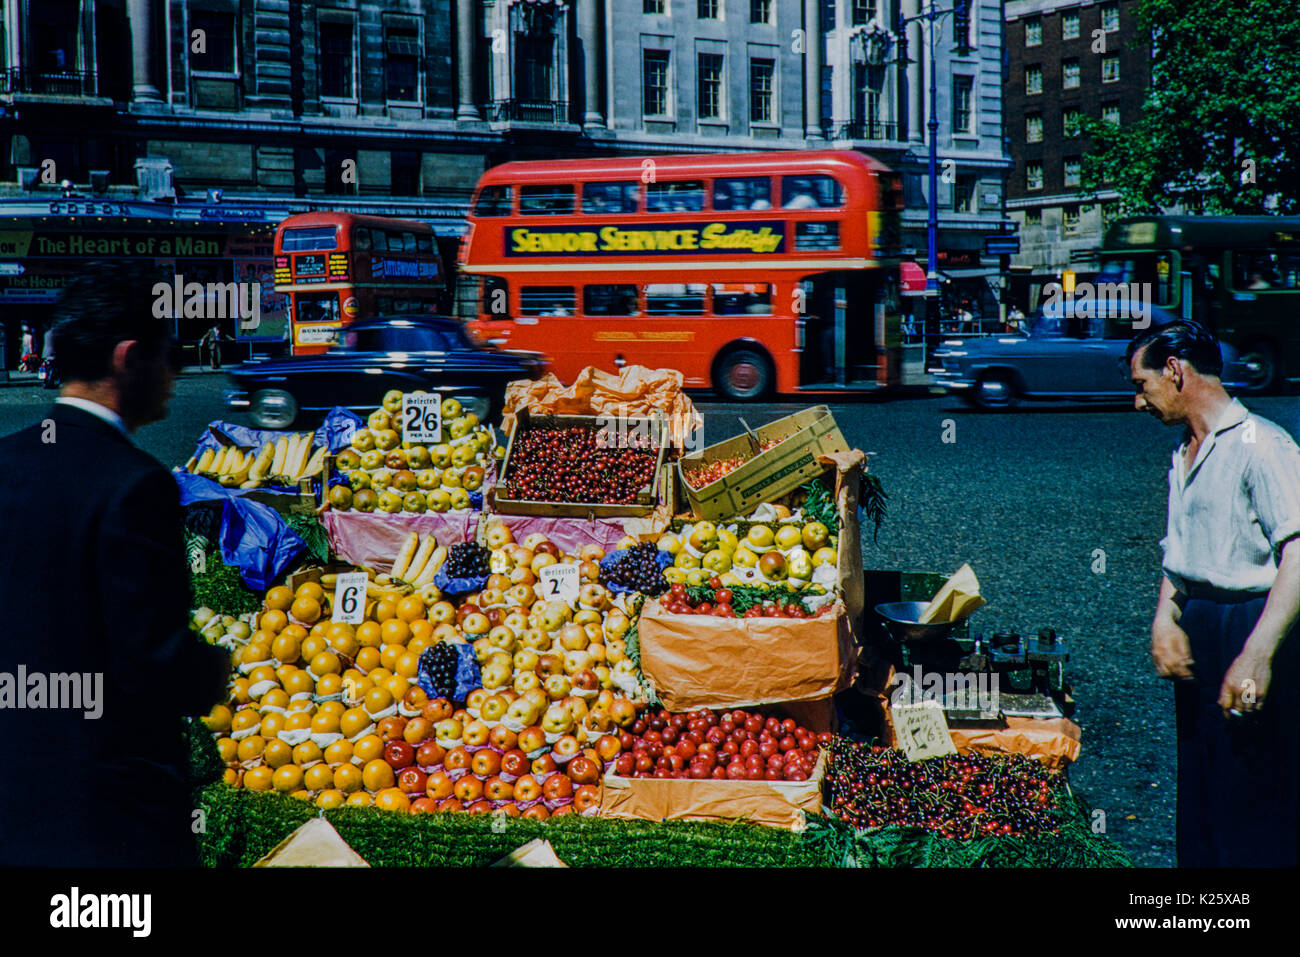 Fruit seller outside Marble Arch's Odeon Cinema. Image taken in 1959 A moment in time captured with a fruit and veg stand along with the trader. Stock Photo